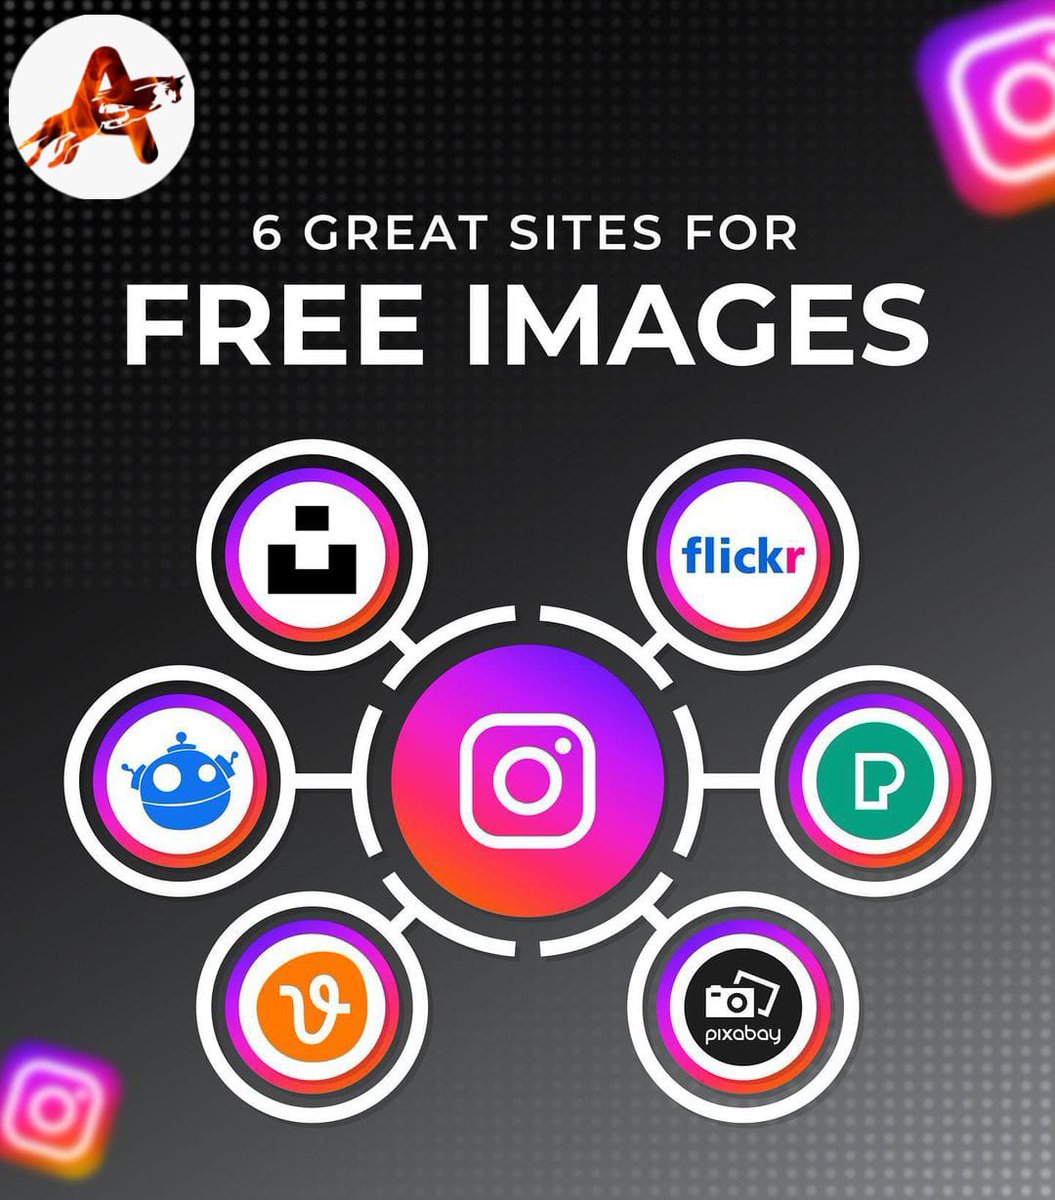 6 Great sites for free images
...................
#freephotos, #stockphotos, #stockimage, #gratisimages, #royaltyfreeimages, #publicdomainimages